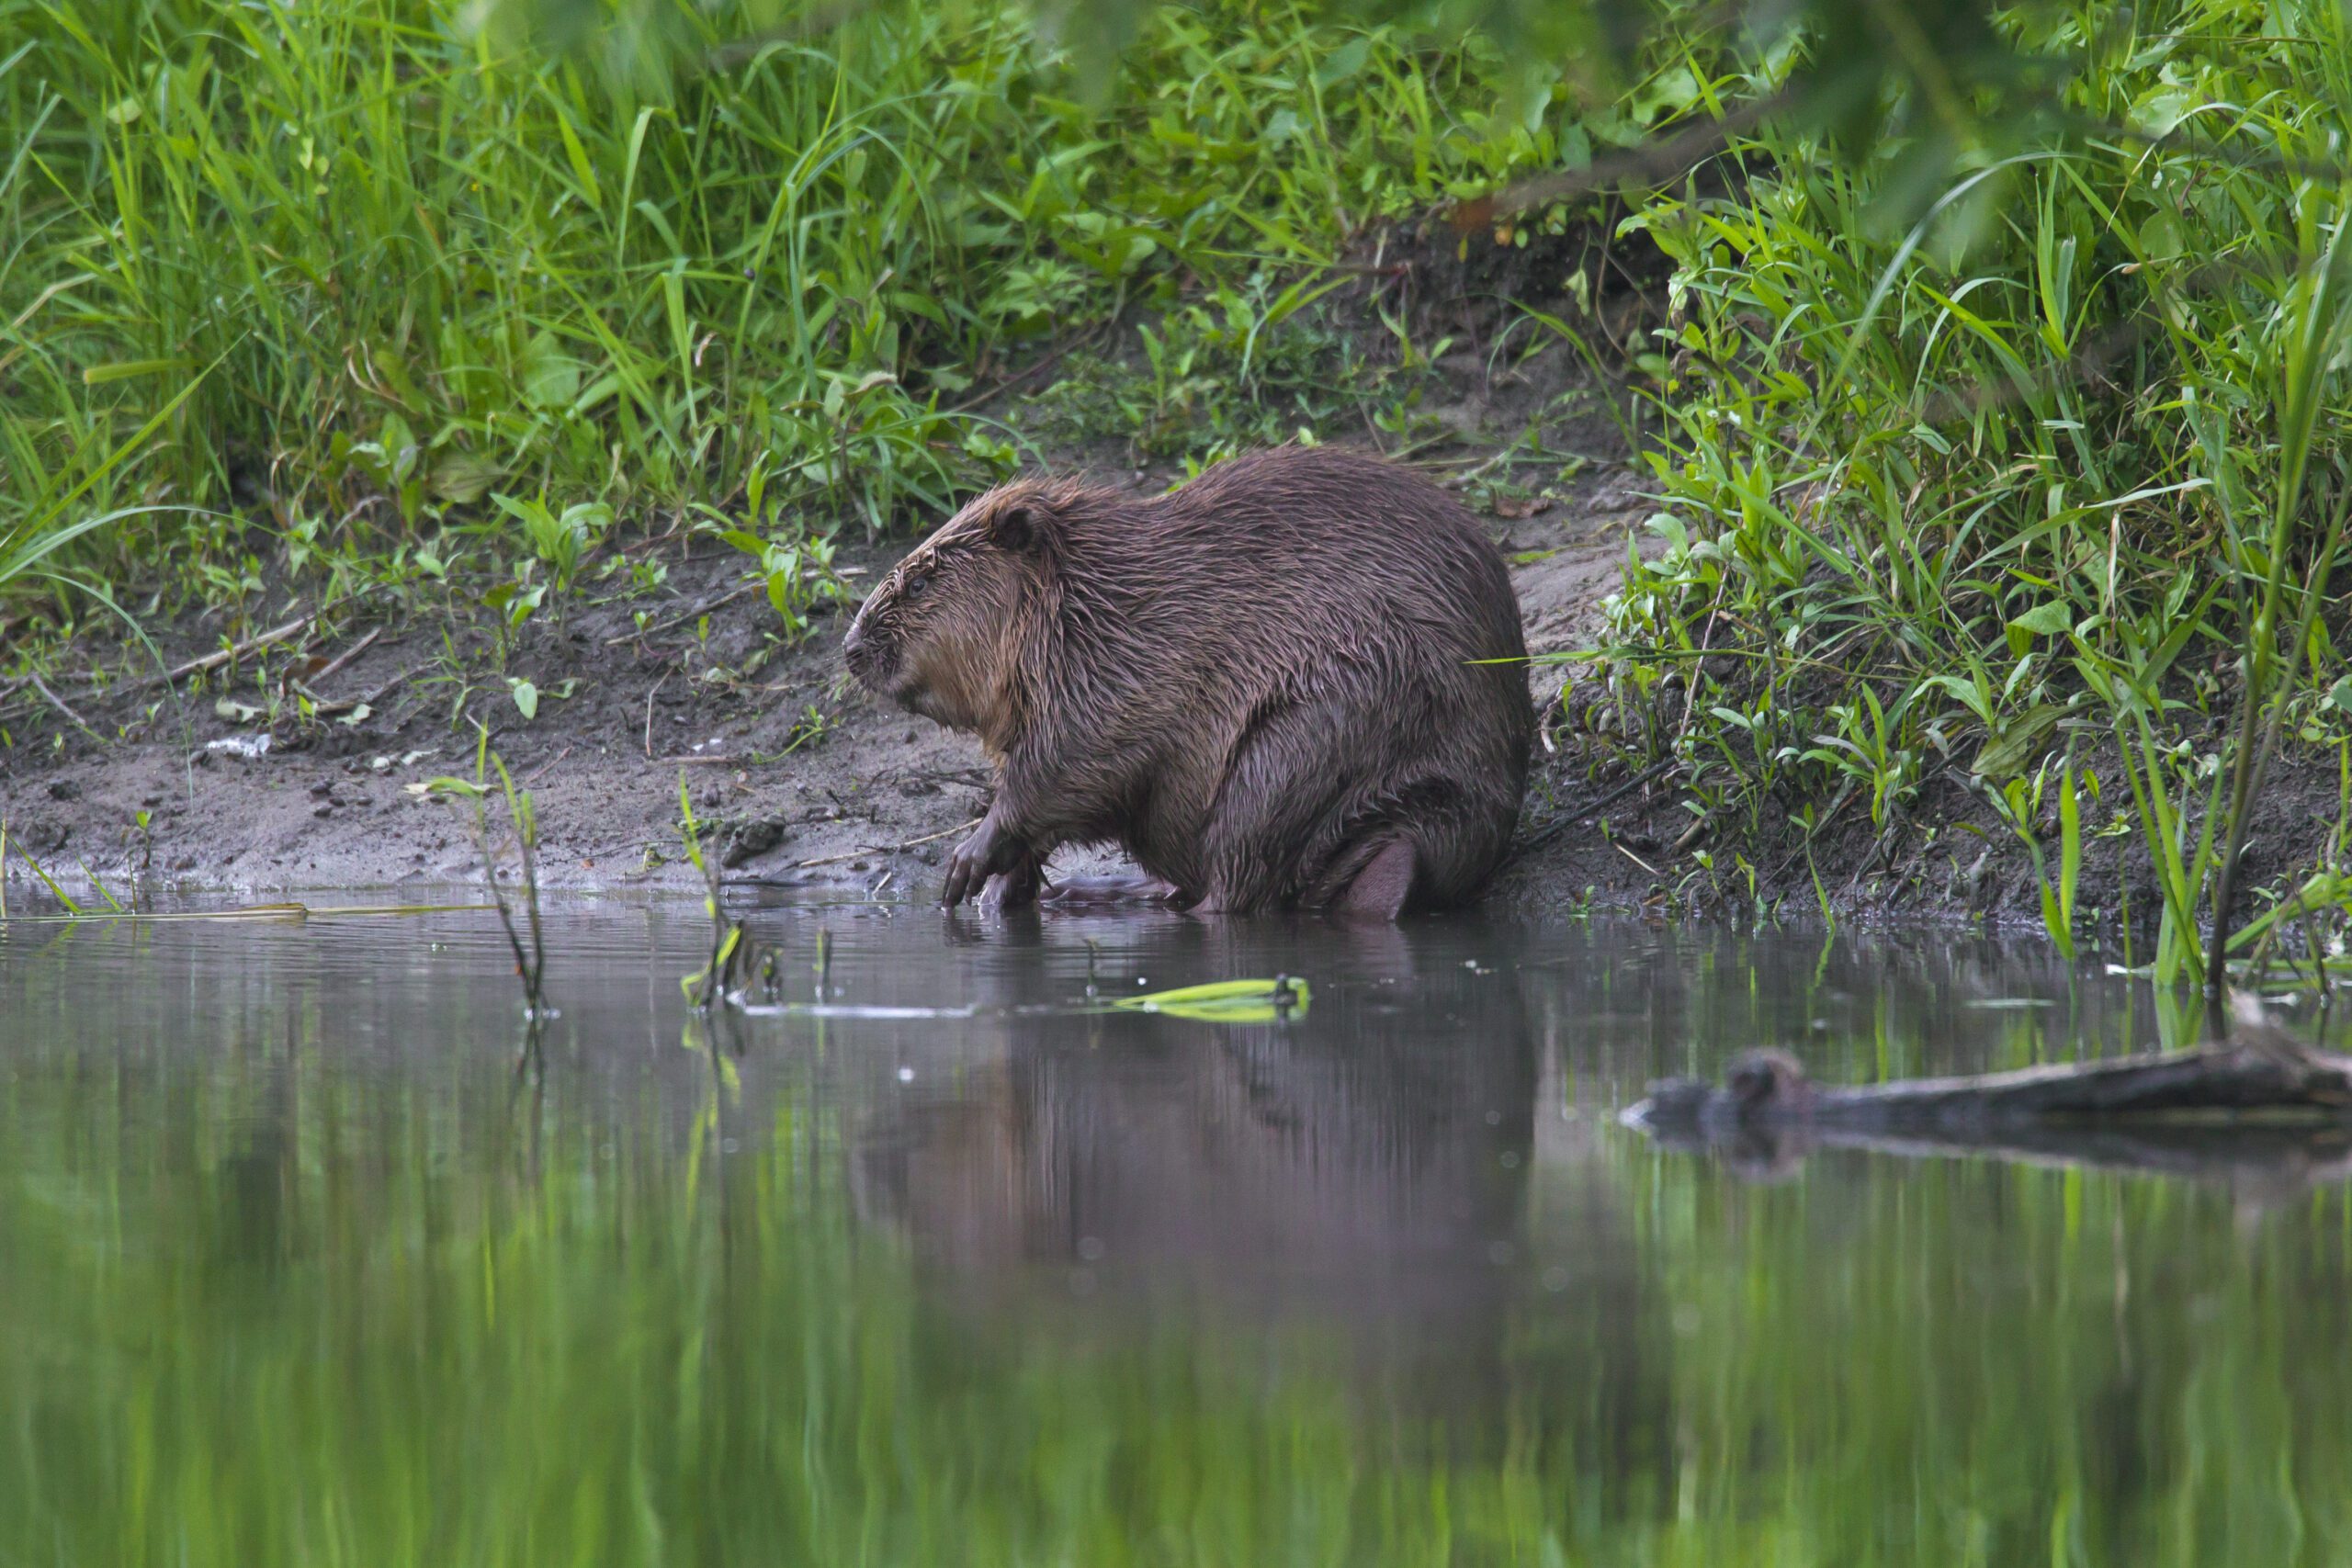 A beaver dips its front paws into water by a grassy riverbank